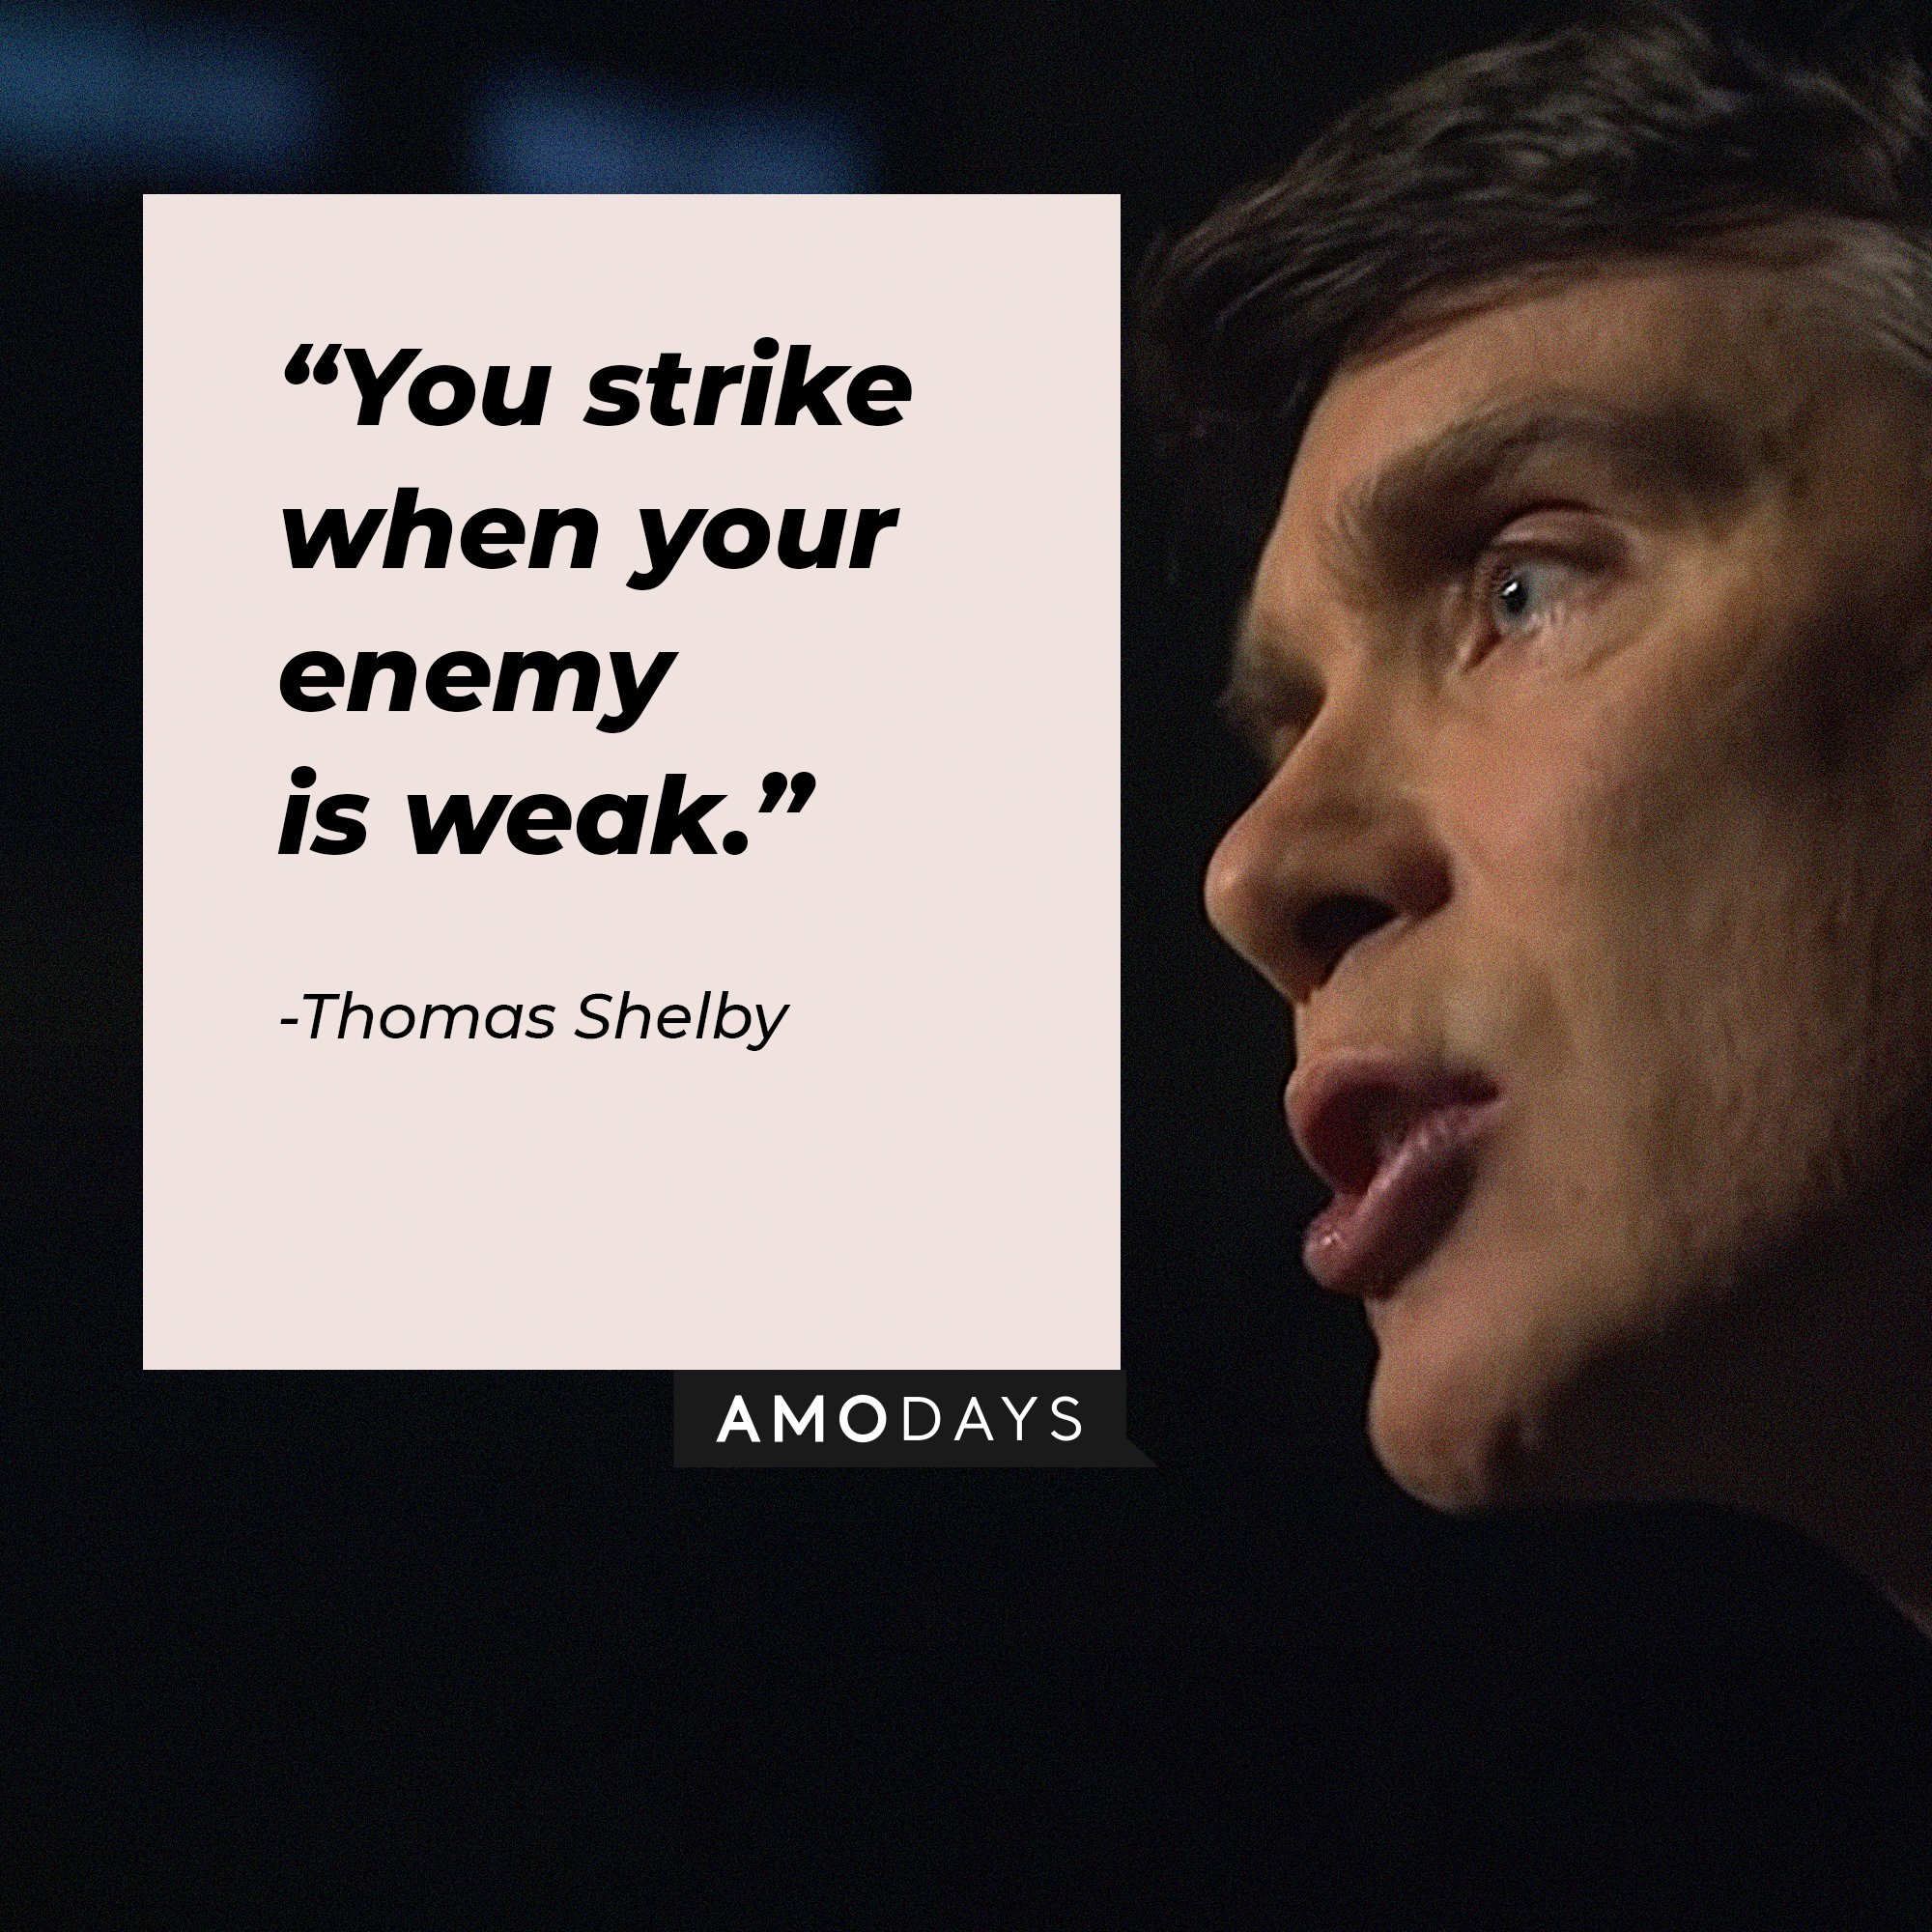 Thomas Shelby's quote: “You strike when your enemy is weak.”  | Image: AmoDays